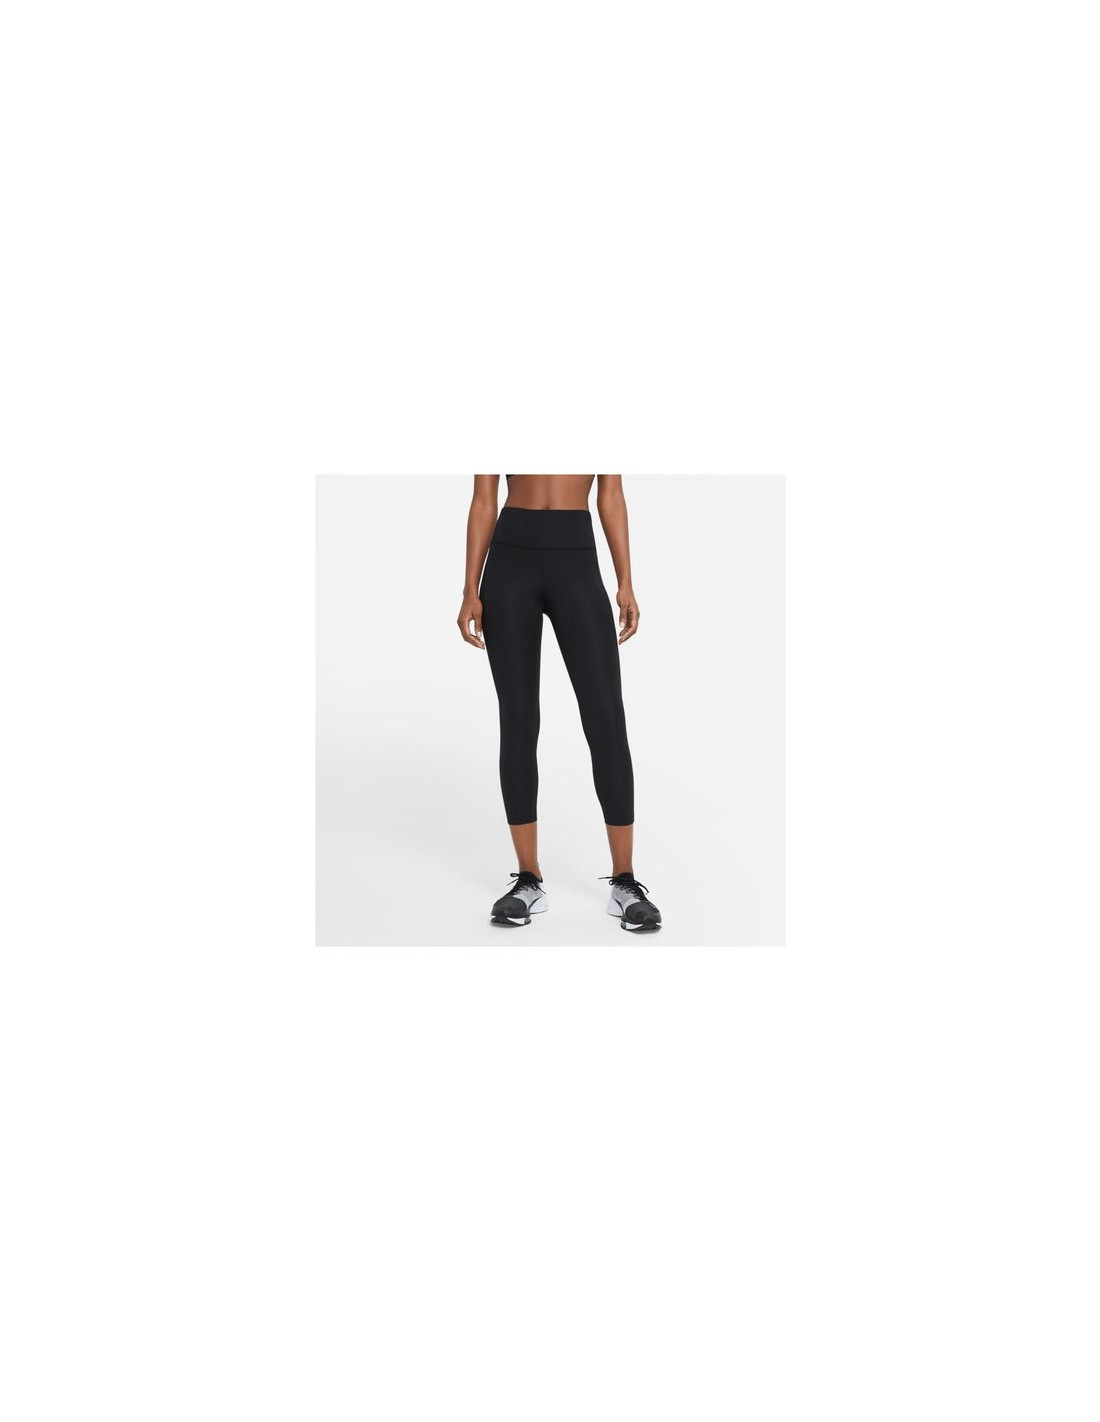 NIKE EPIC FAST WOMEN'S CROPPED